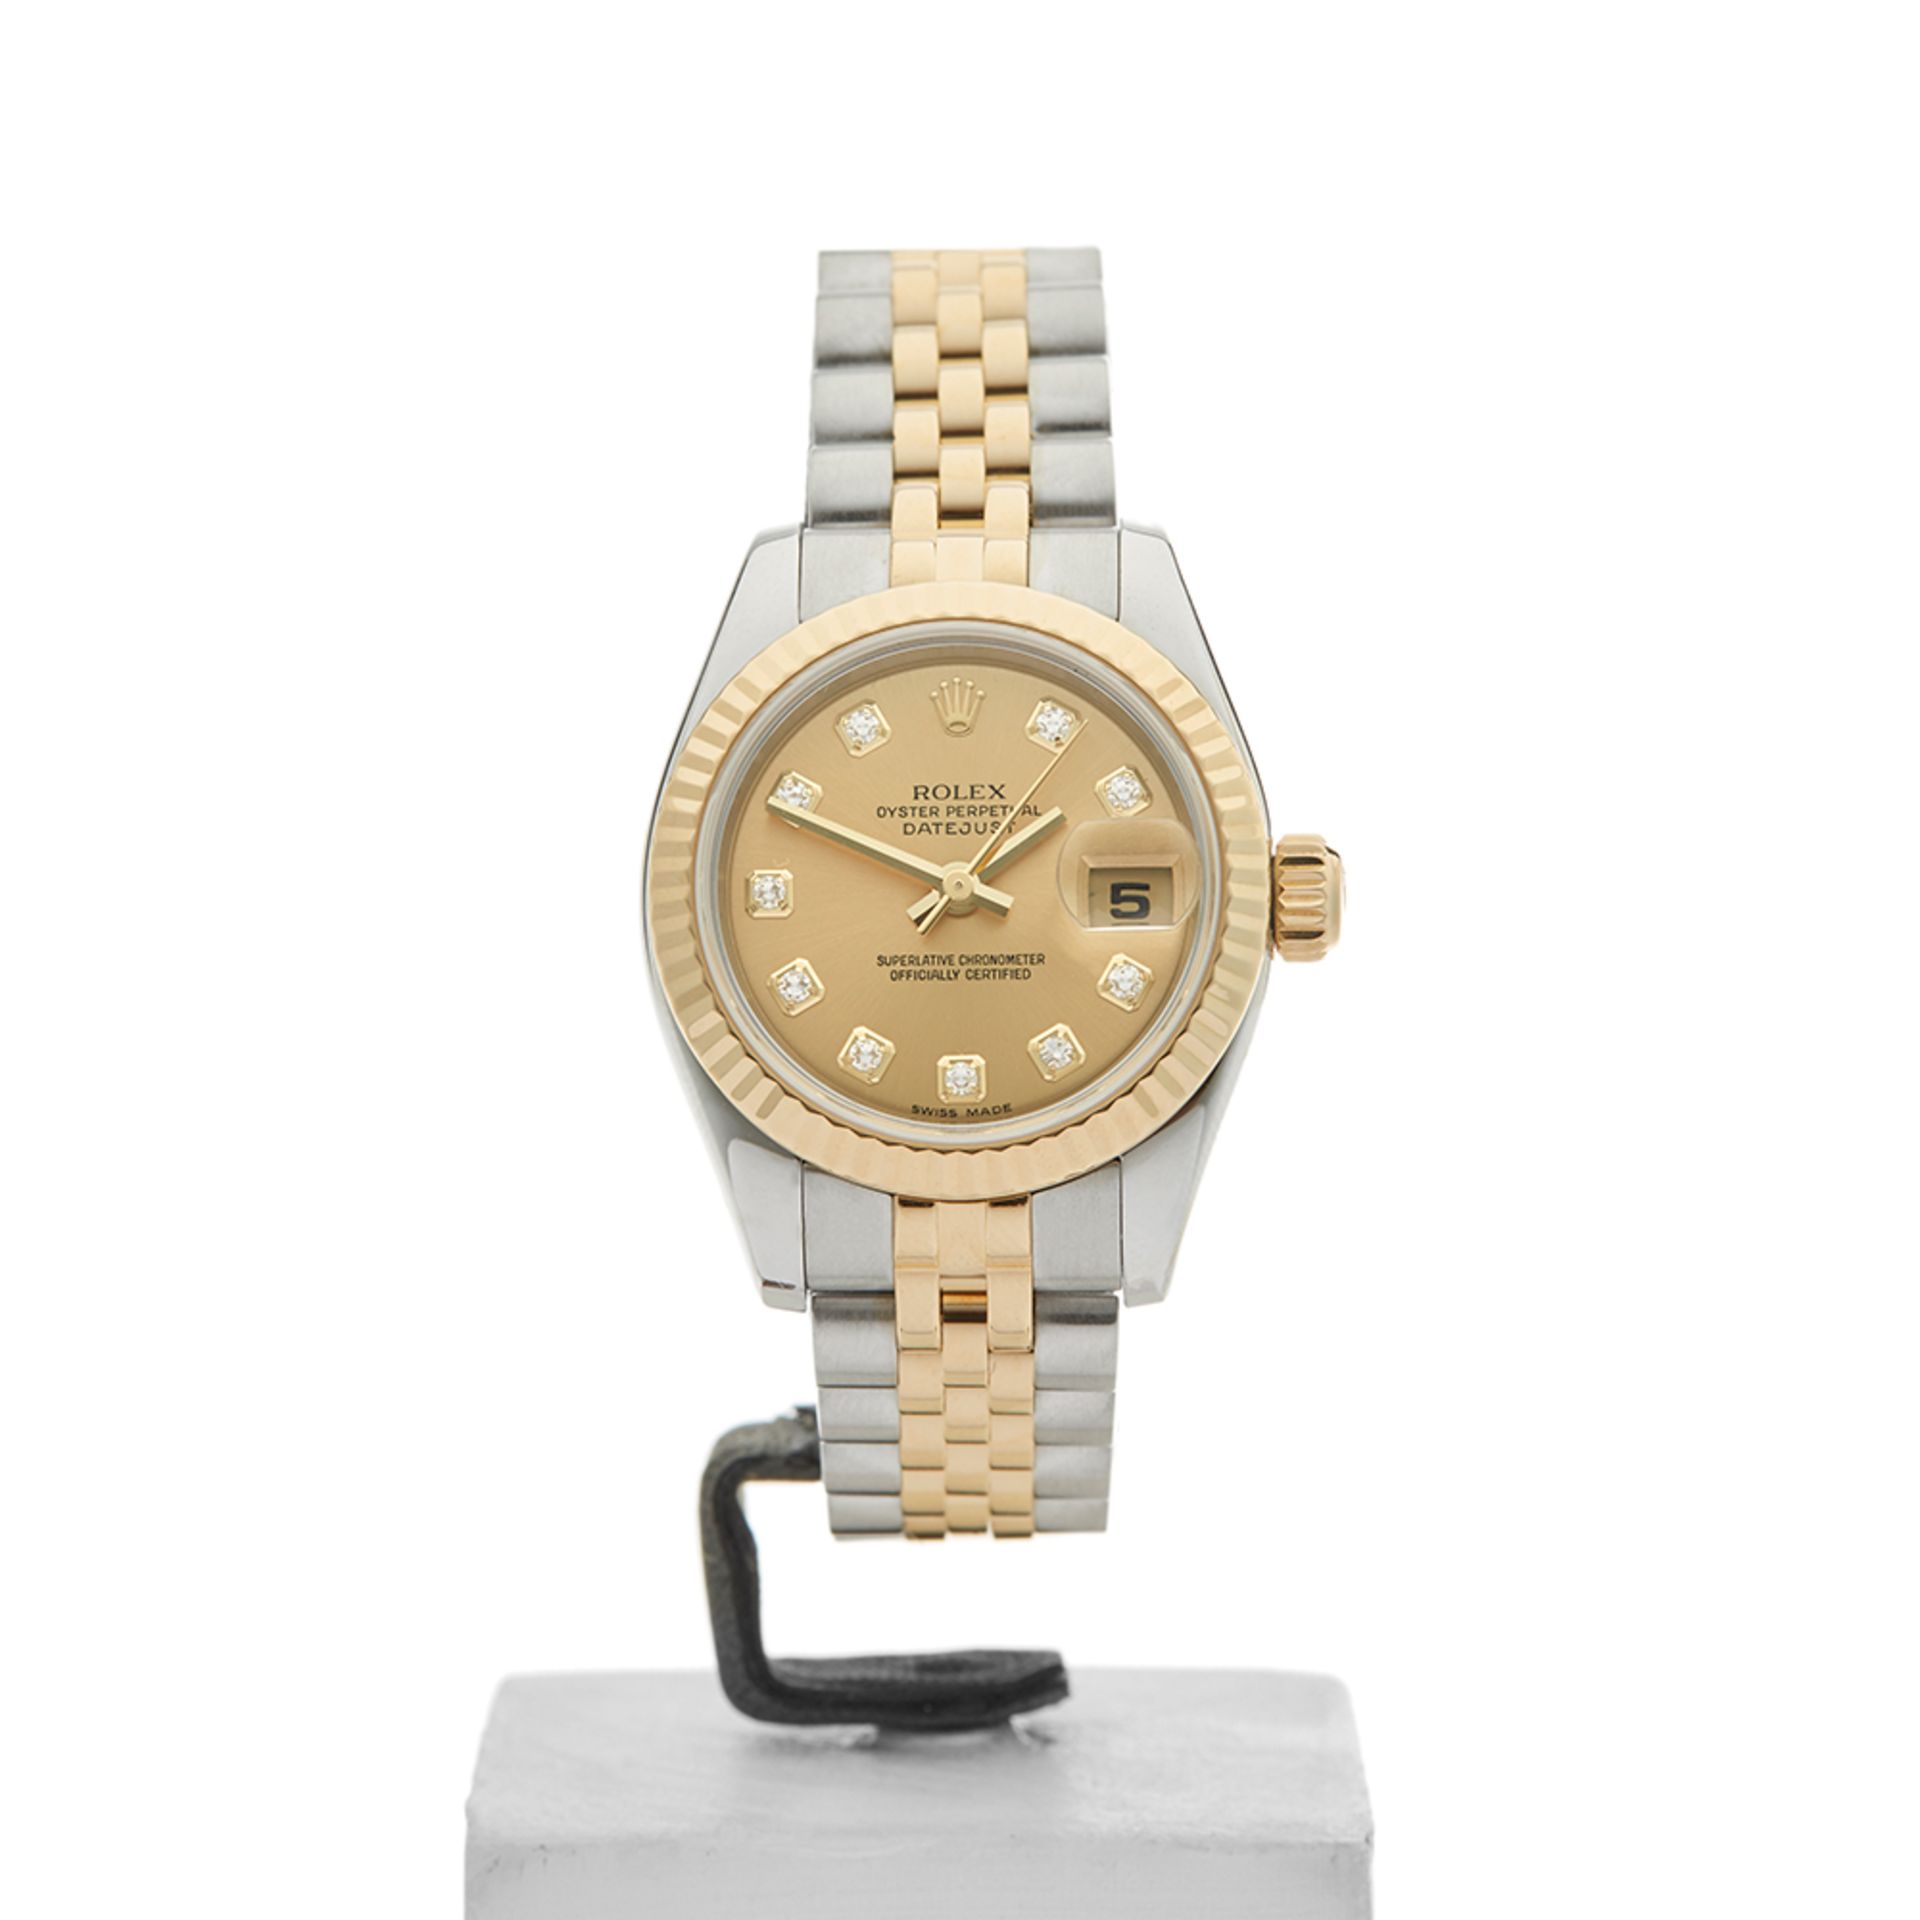 Datejust 26mm Stainless Steel & 18k Yellow Gold - 179173 - Image 2 of 9